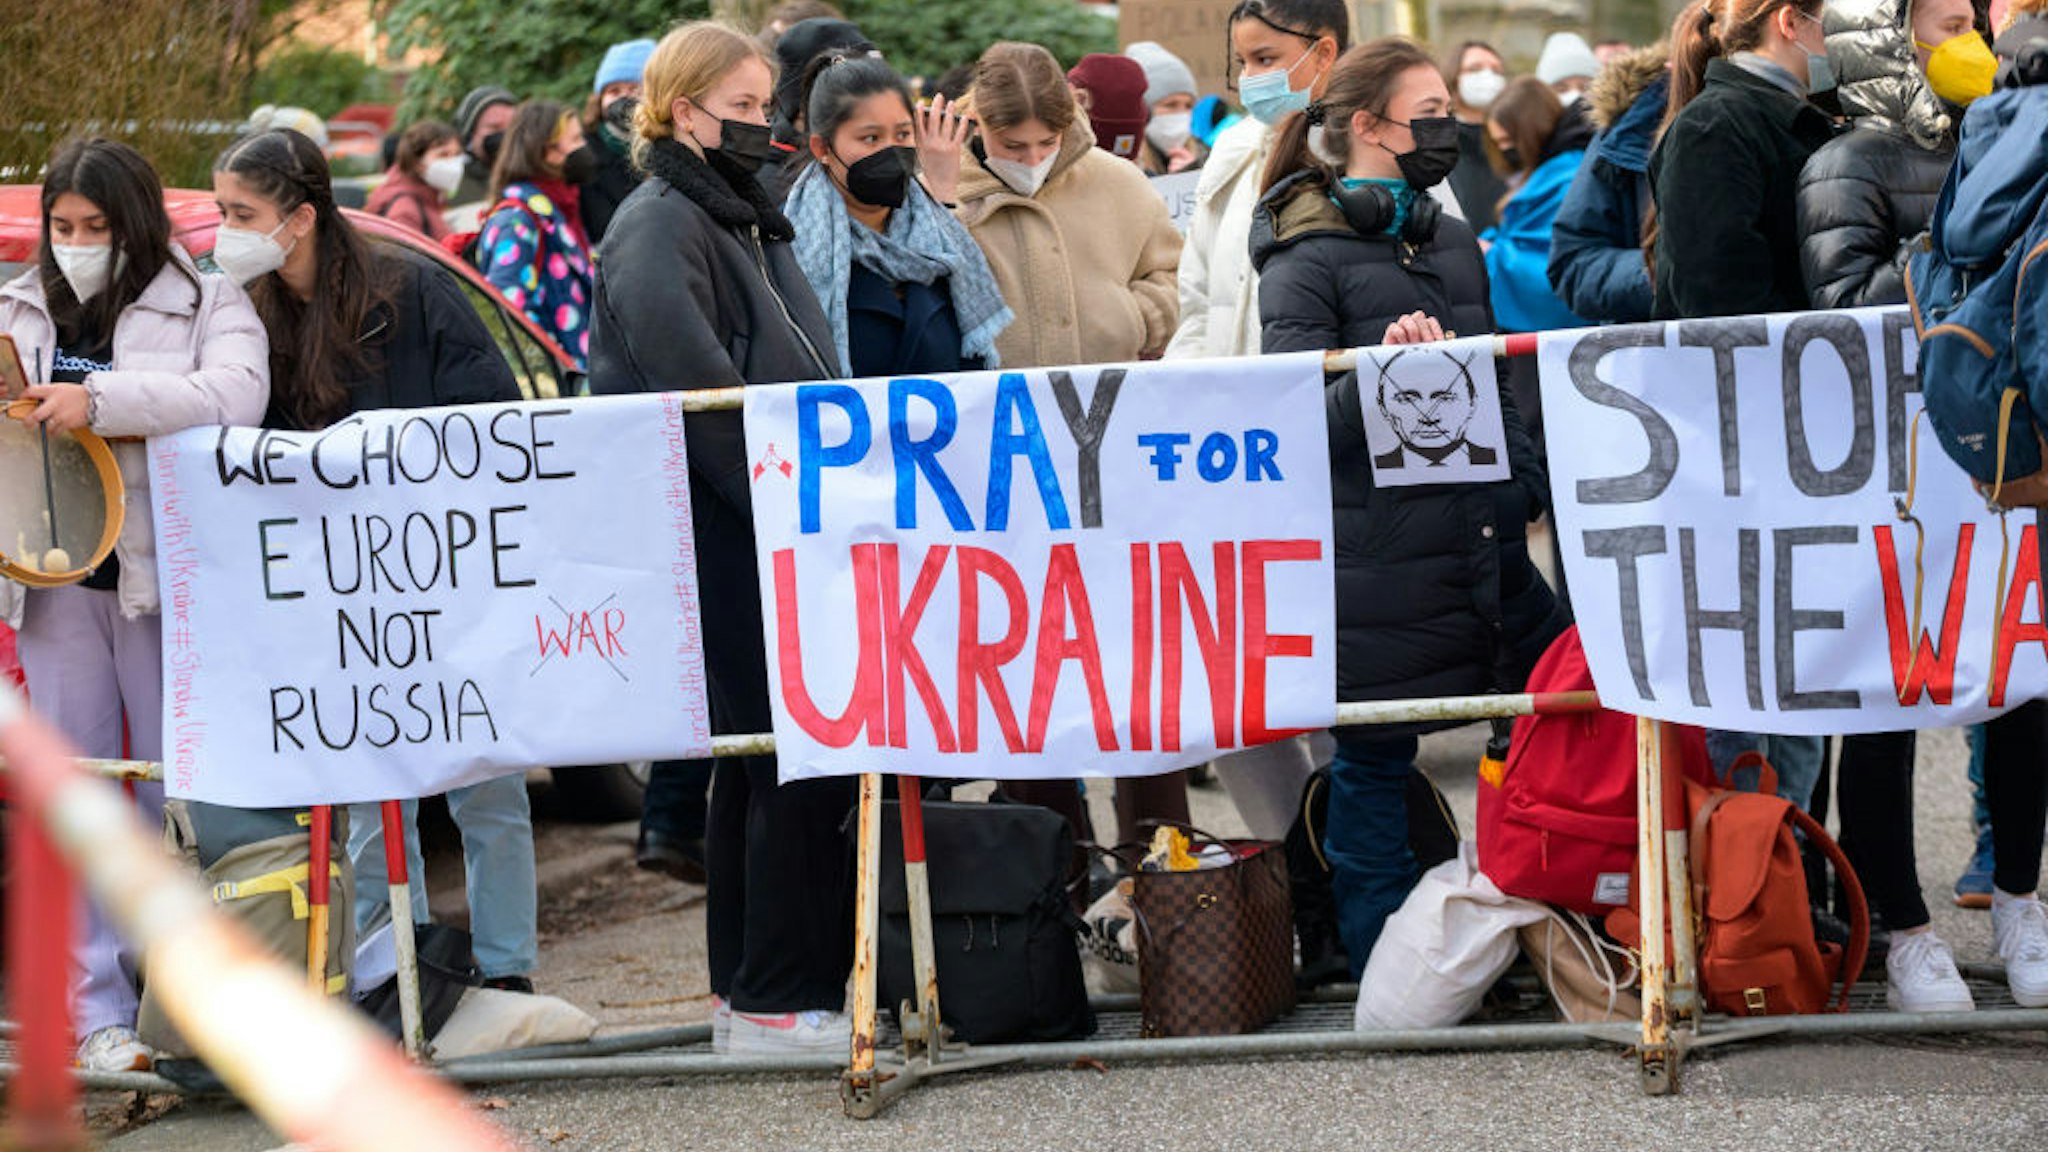 Participants of a protest against the Russian invasion of Ukraine stand in front of the Russian Consulate General with flags and posters reading "We choose Europe not Russia", "Pray for Ukraine" and "Stop the war".